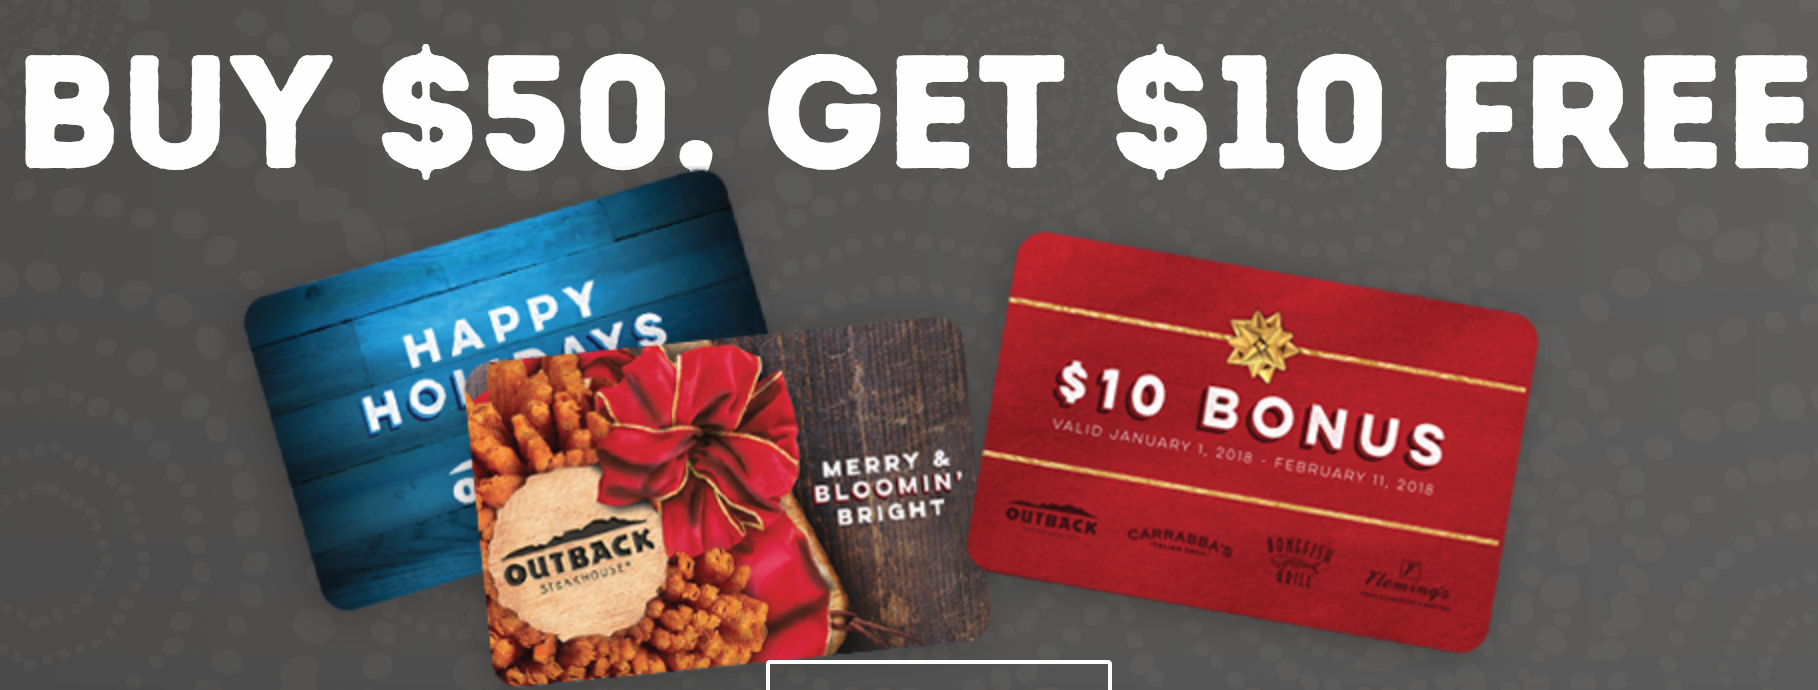 Bloomin Brands And Outback Steakhouse Holiday Gift Card Offer